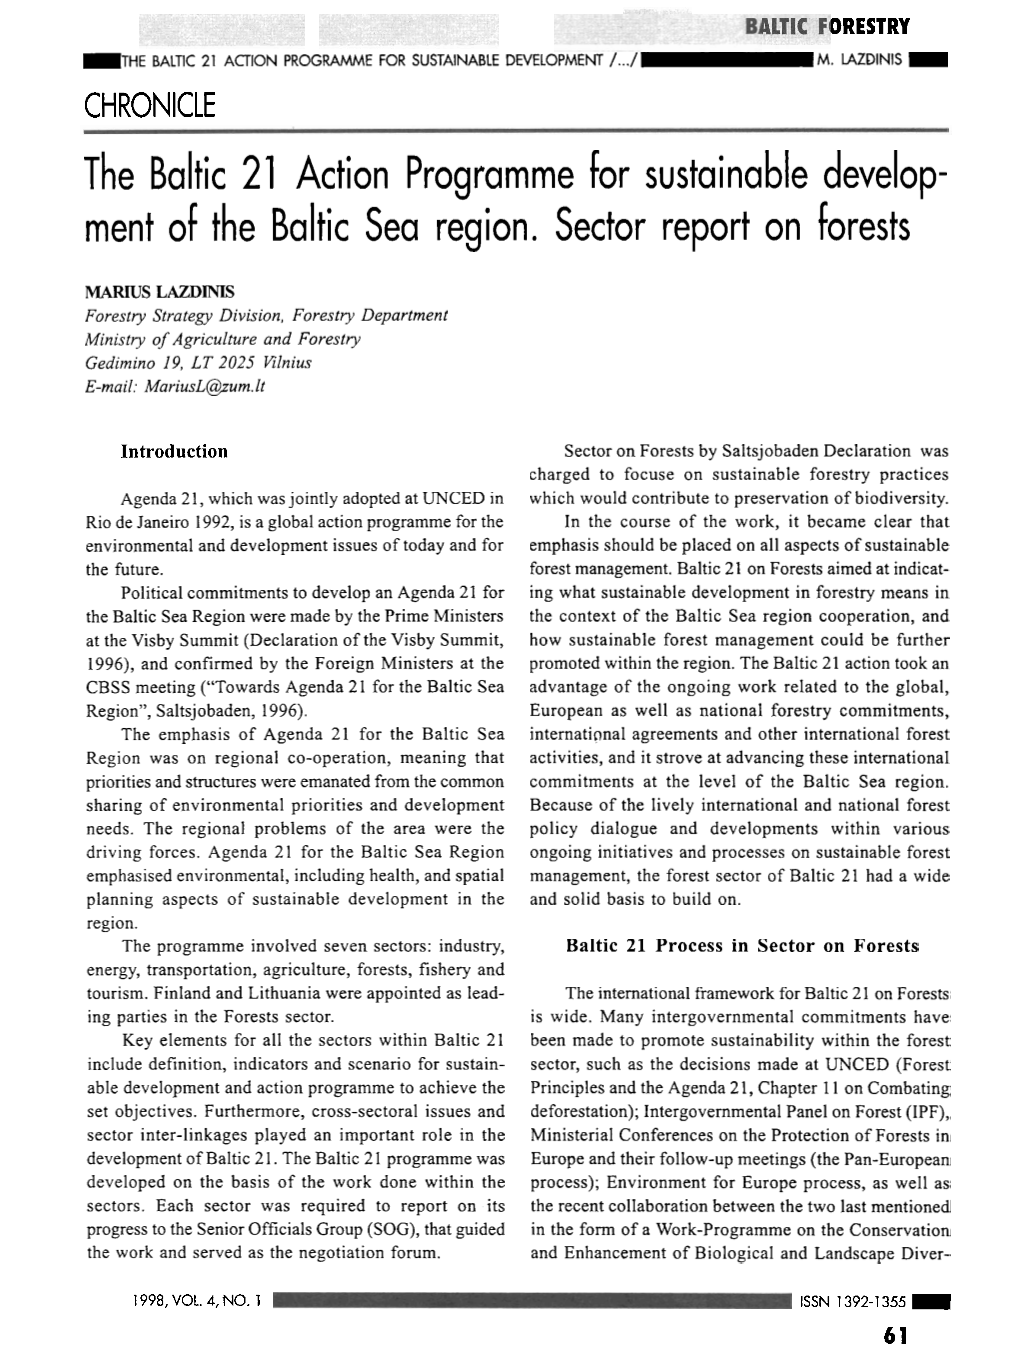 The Baltic 21 Action Programme for Sustainable Develop- Ment of the Baltic Sea Region